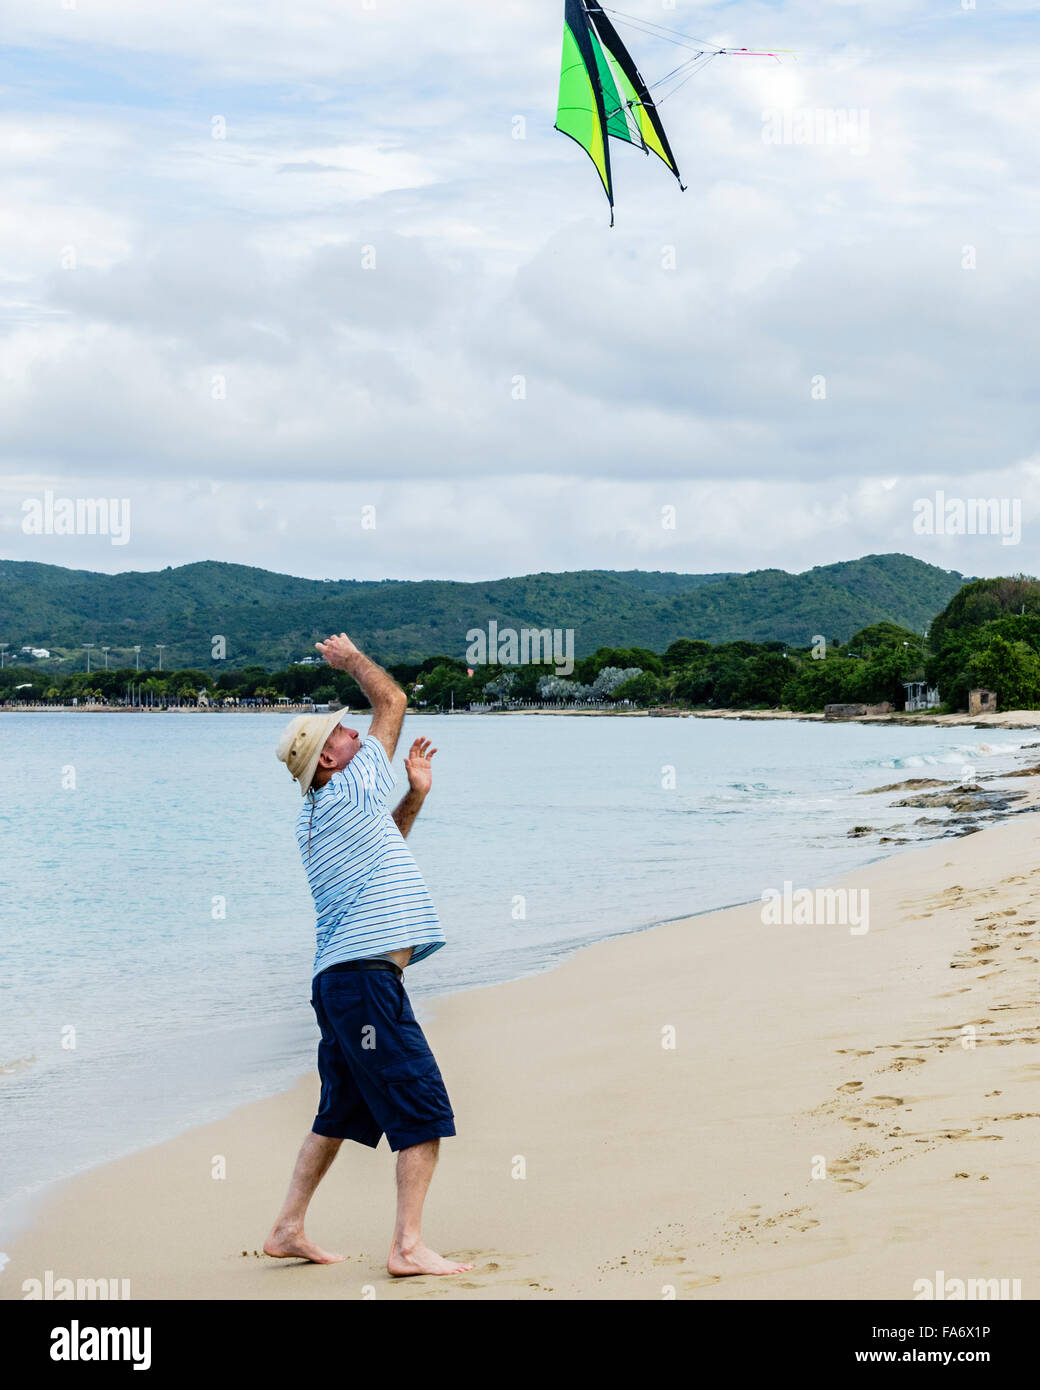 A senior Caucasian man tosses a kite airborne to help a friend launch it on the beach of St. Croix, U.S. Virgin Islands. Stock Photo